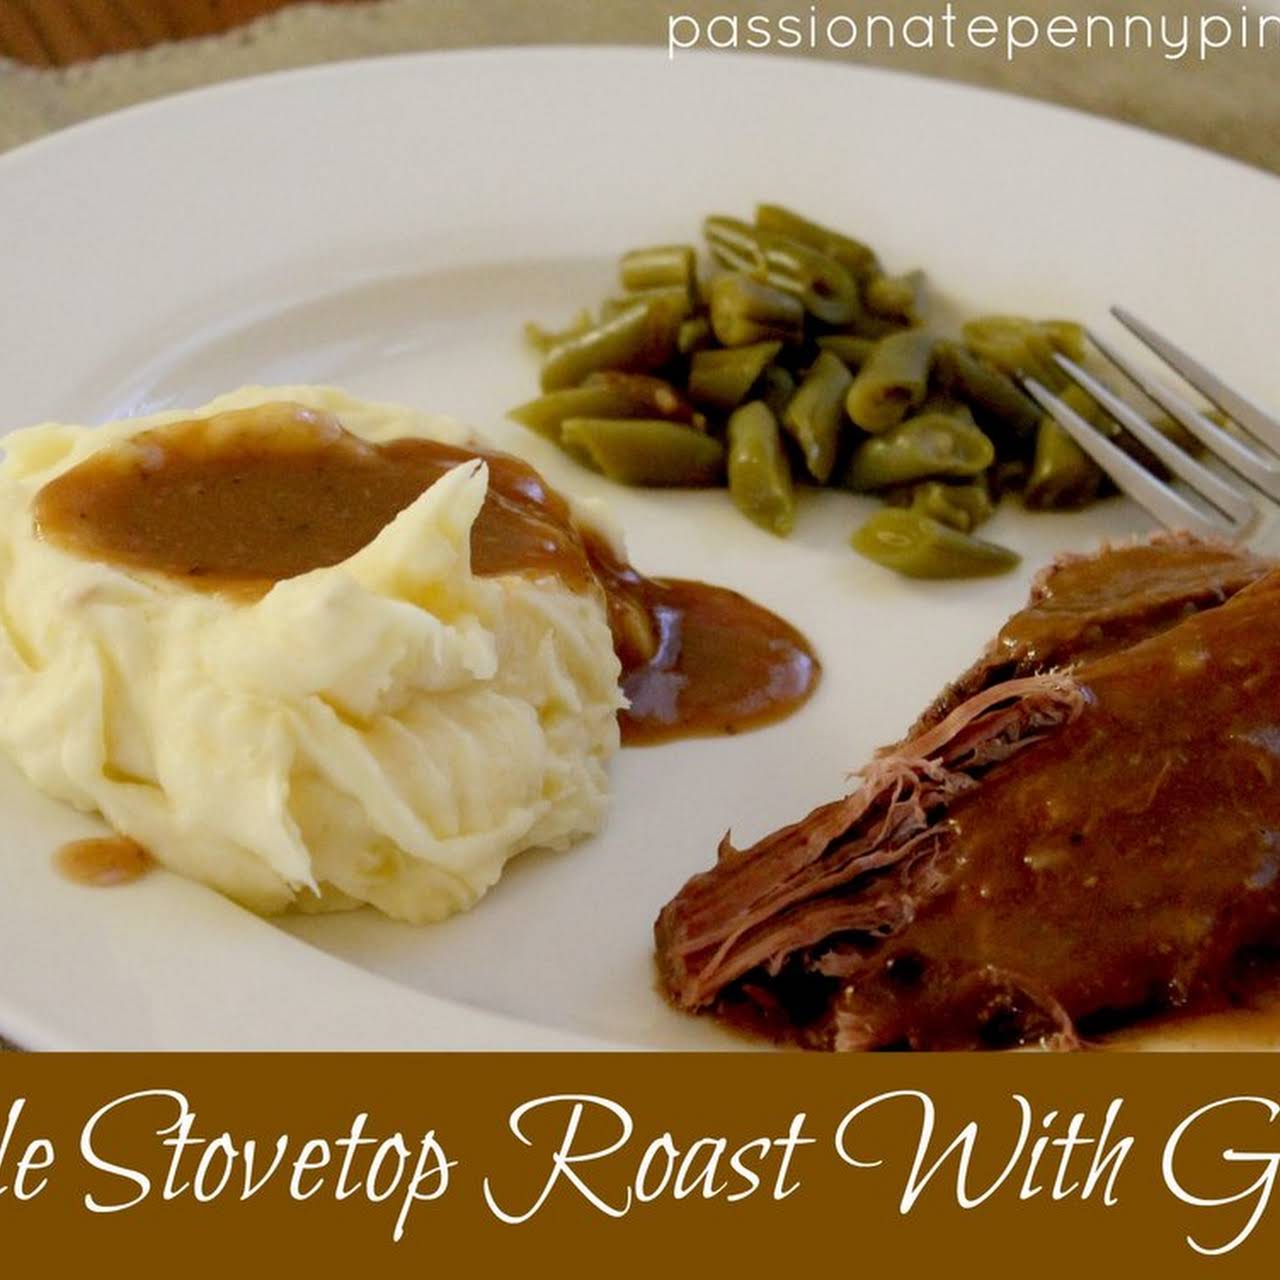  easy to get to Stovetop Roast